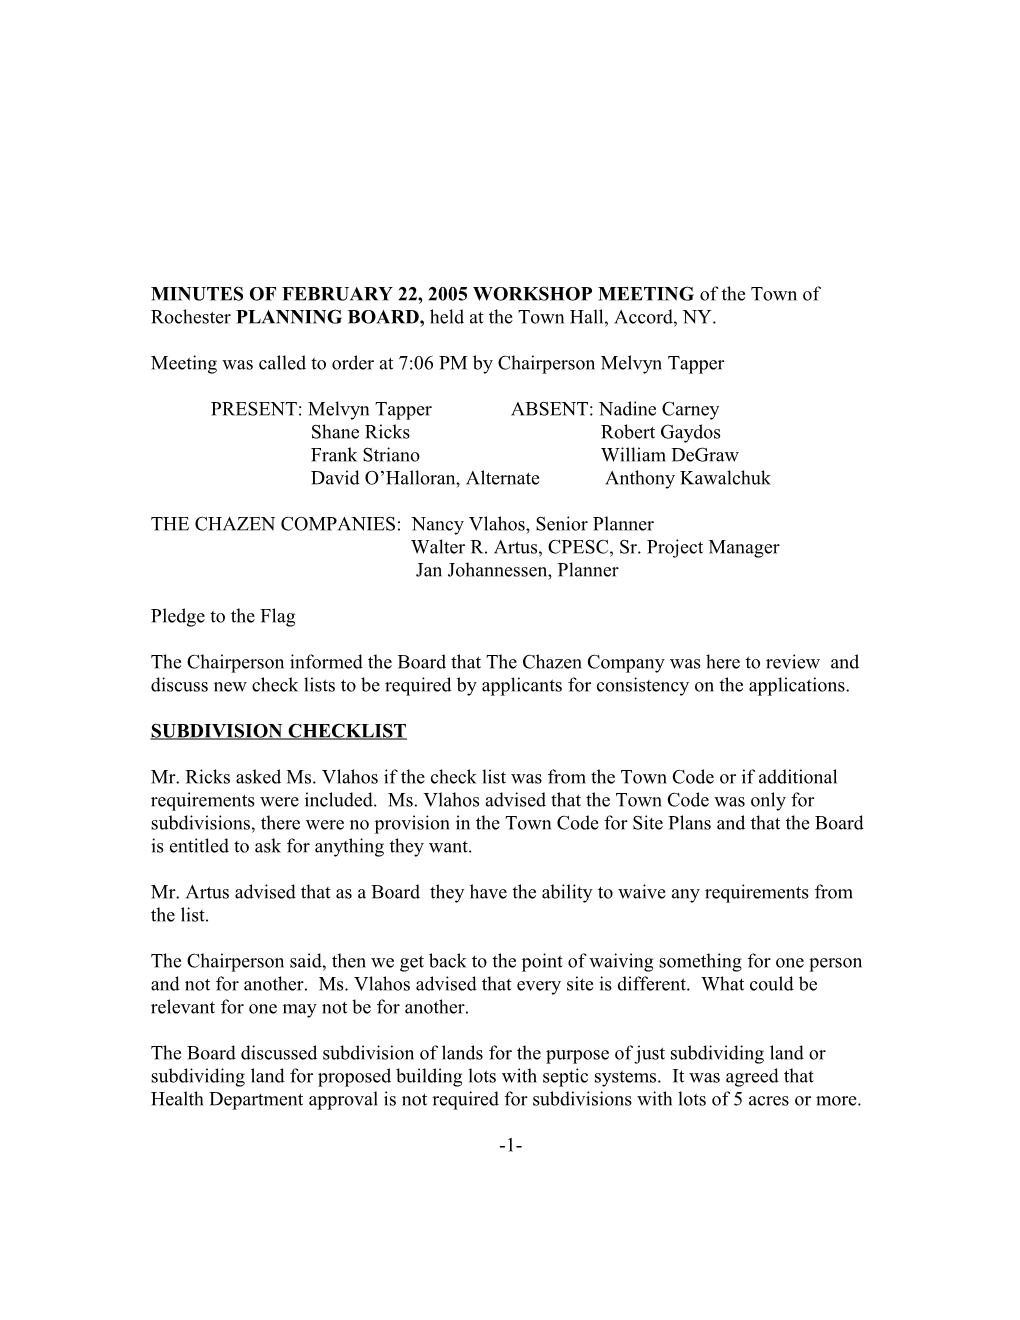 MINUTES of FEBRUARY 22, 2005 WORKSHOP MEETING of the Town of Rochester PLANNING BOARD